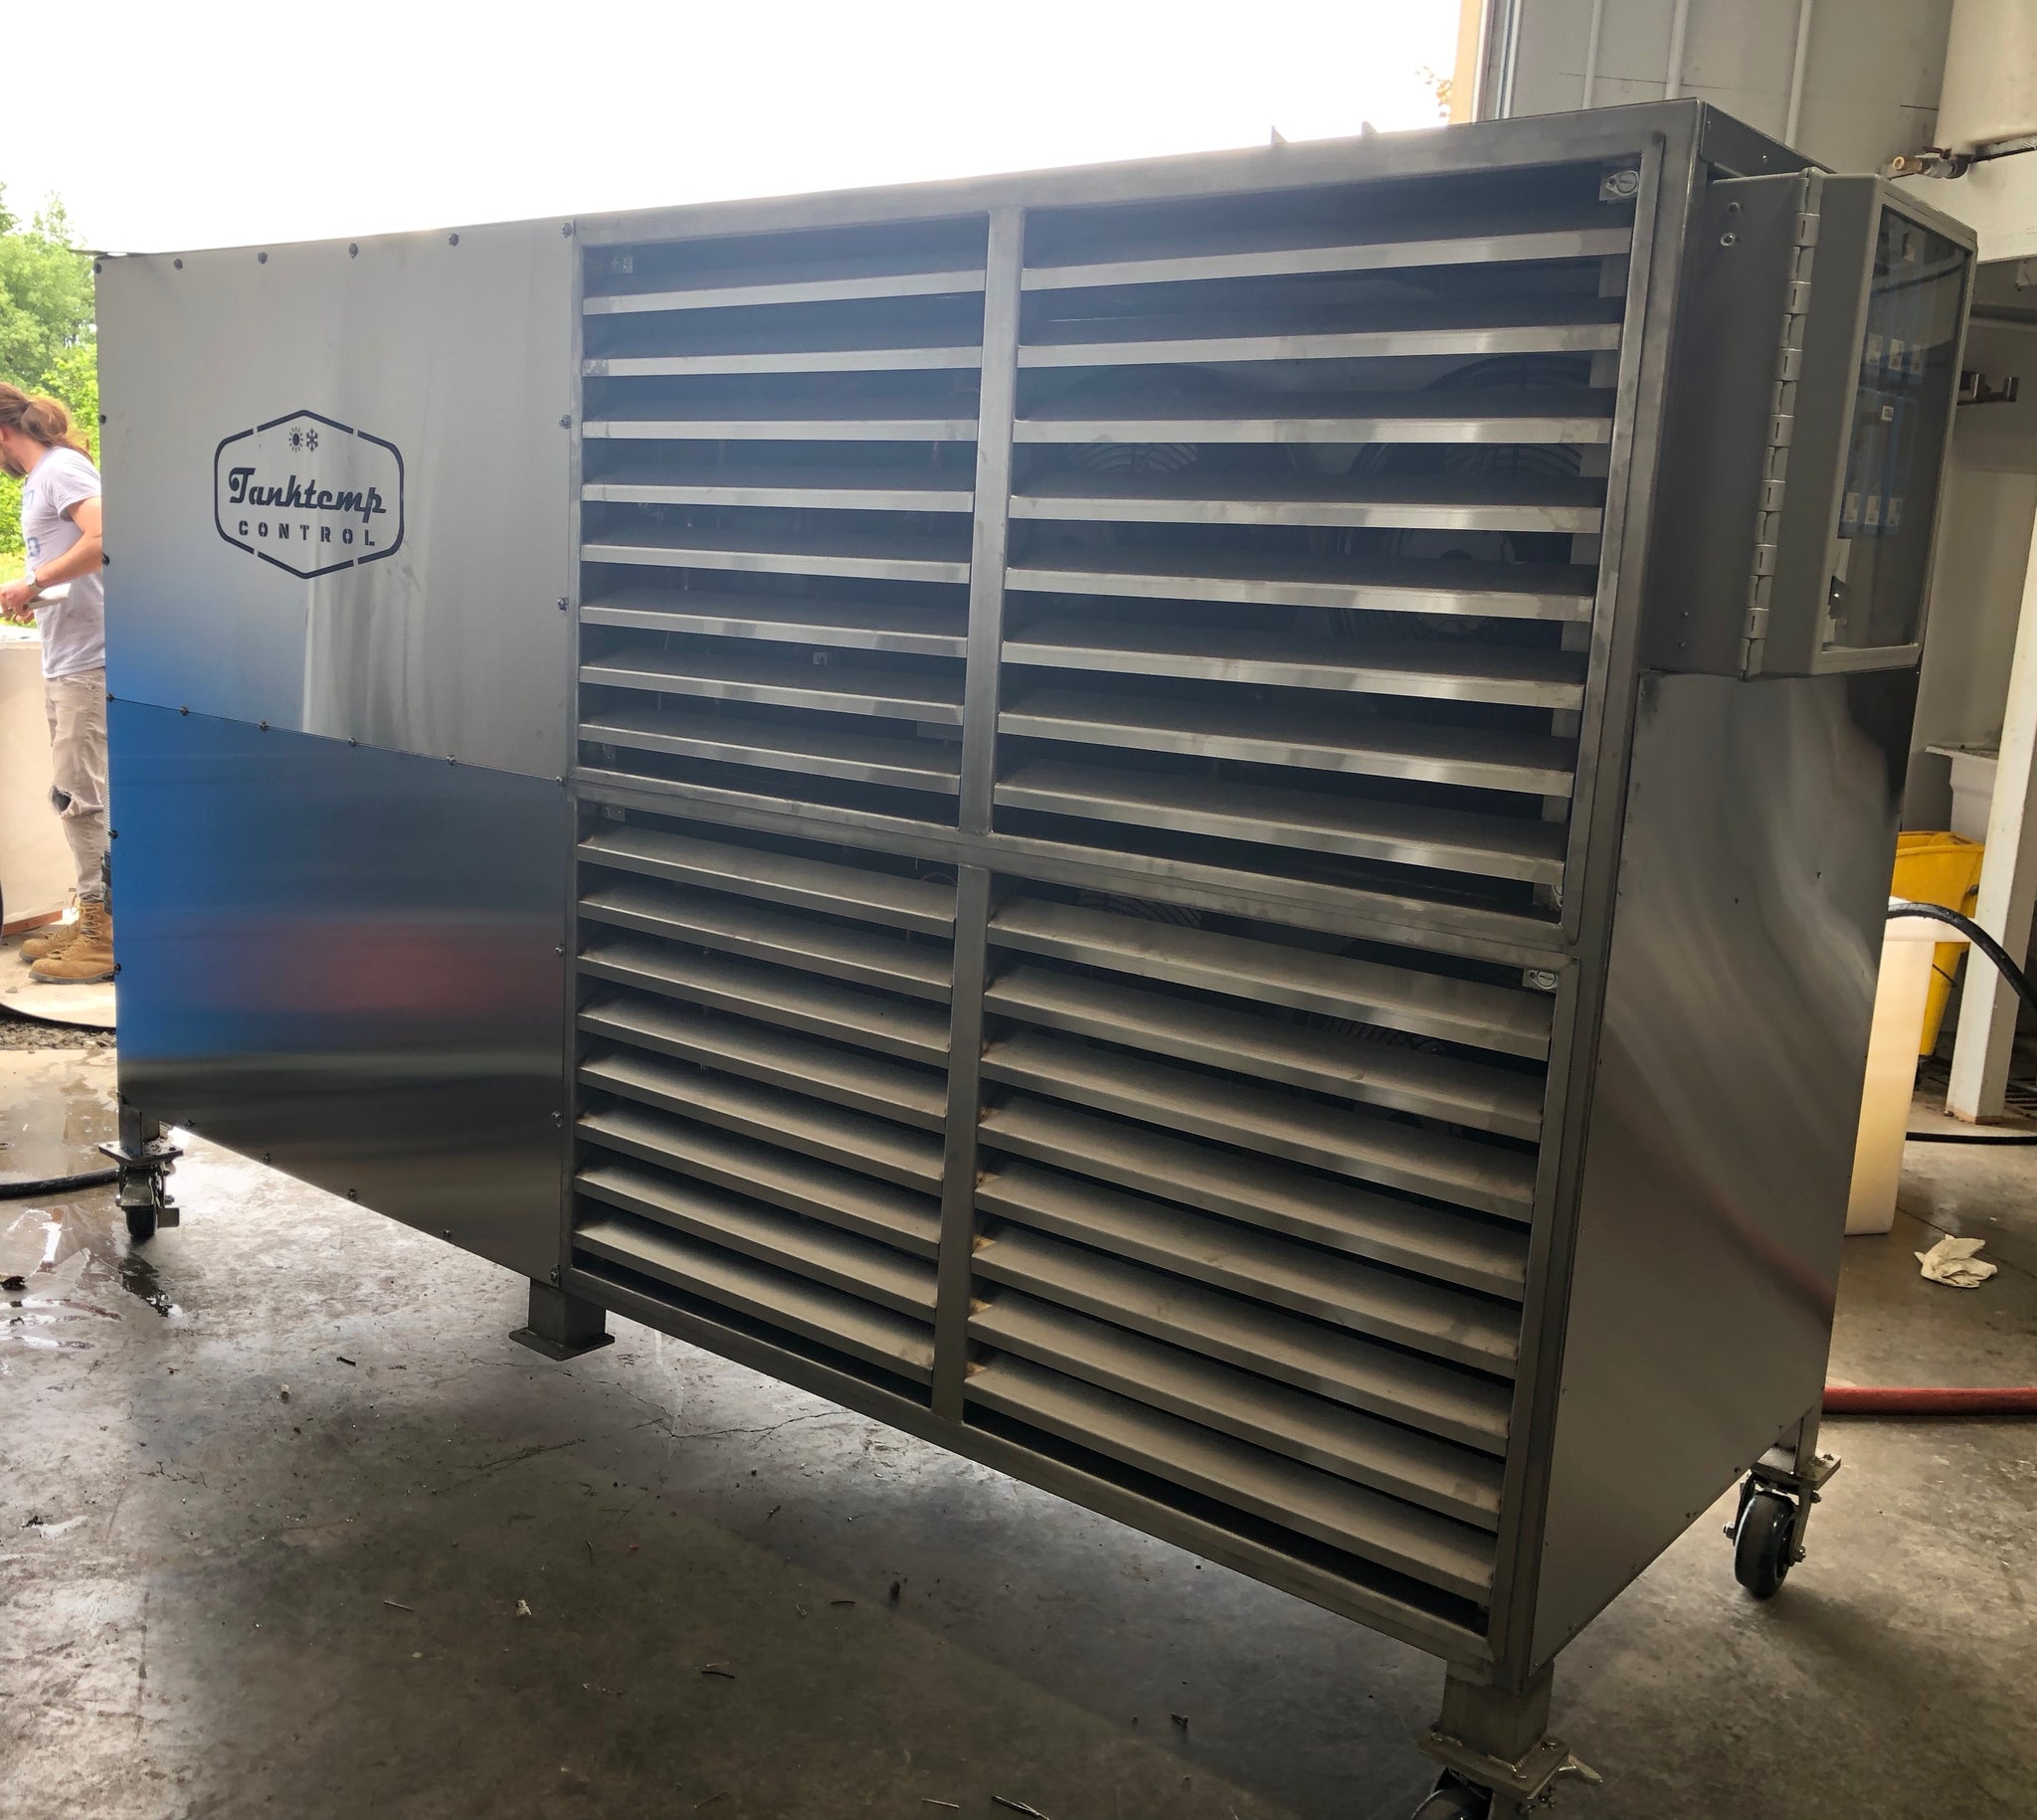 Commercial Glycol Chillers - Glacier Tanks - China Chiller, Water Chiller